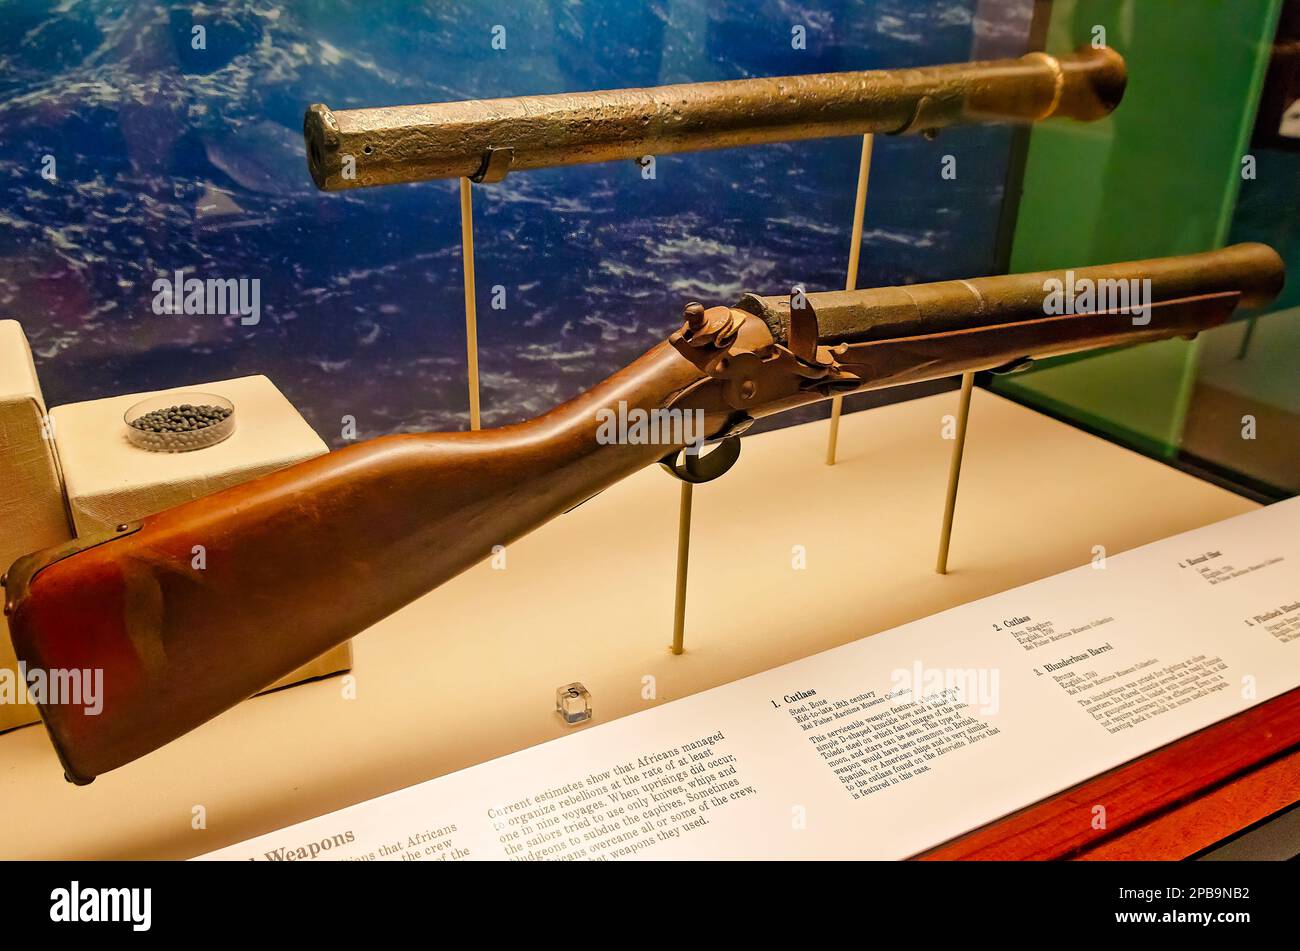 A blunderbuss barrel and a flintlock blunderbuss from the slave ship Henrietta Marie circa 1700 are displayed at GulfQuest Museum in Mobile, Alabama. Stock Photo